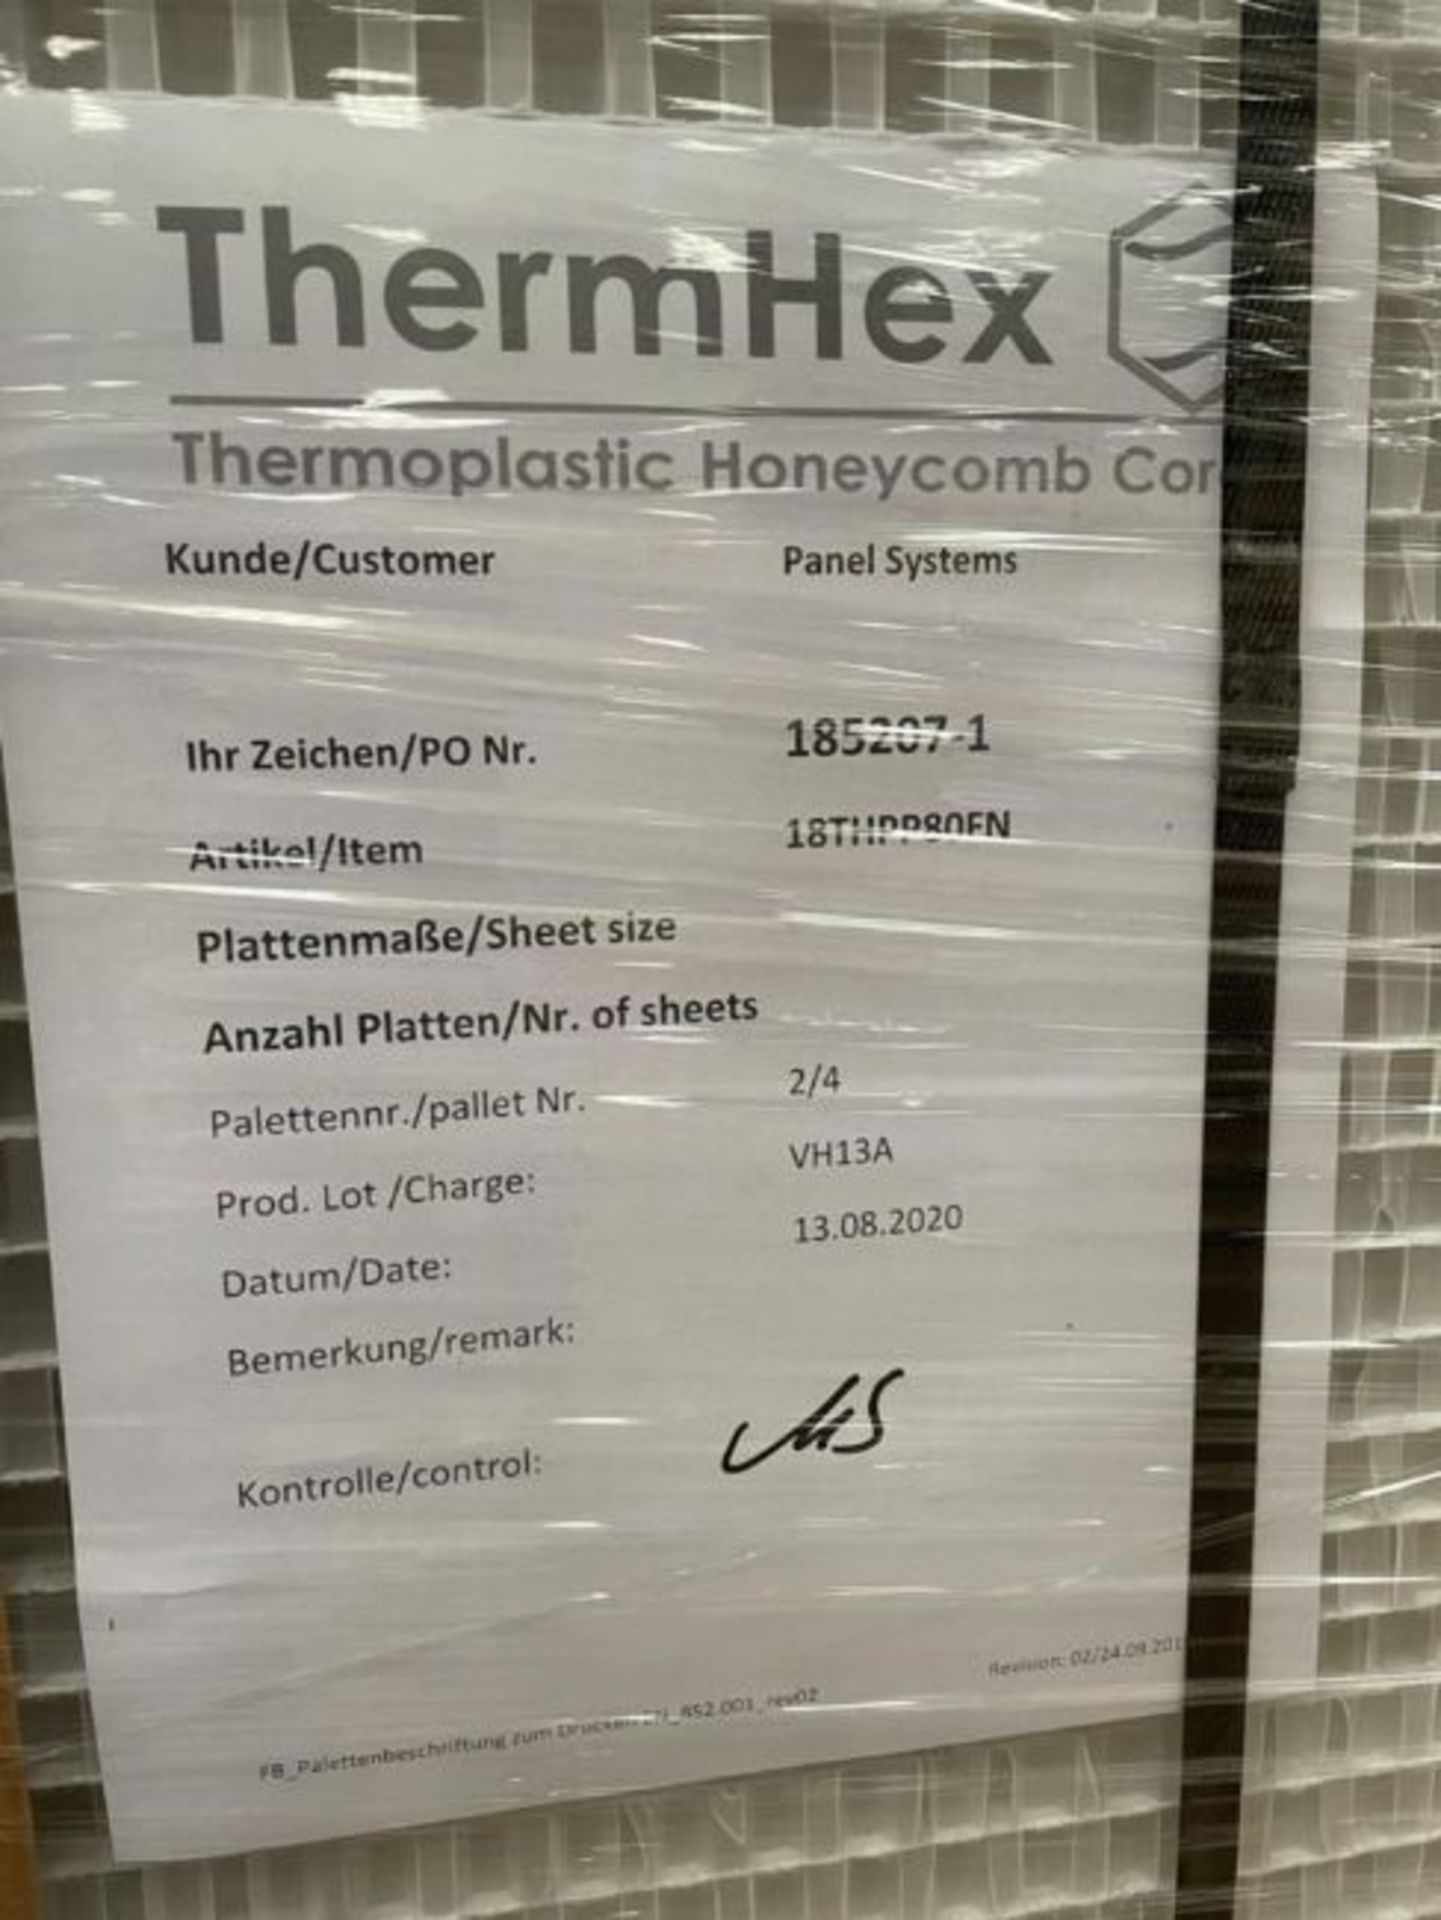 100 x ThermHex Thermoplastic Honeycomb Core Panels - Size: 693 x 1210 x 20mm - New Stock - Lightweig - Image 4 of 10